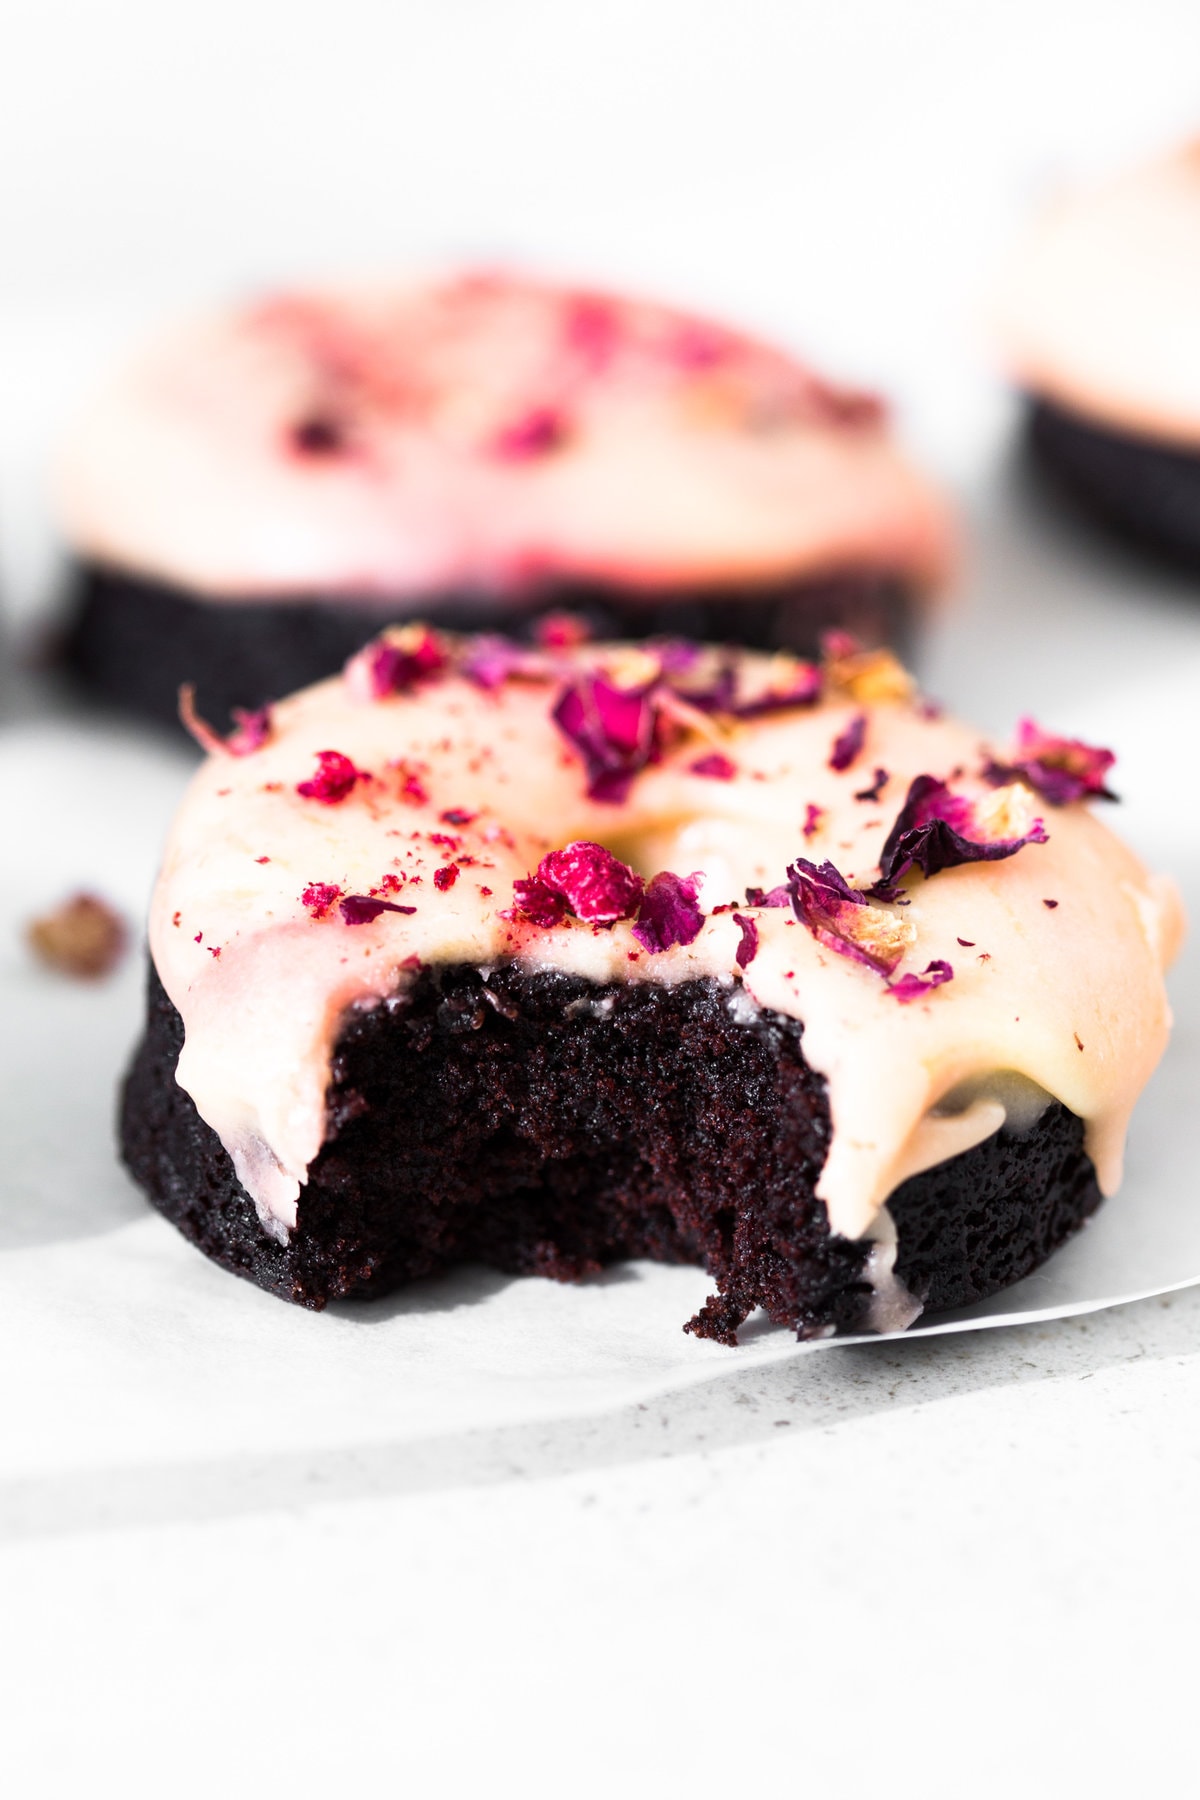 Moist and delicious Vegan Baked Chocolate Donuts topped with a floral Rose Glaze. Easy to make and ready in under 30 minutes. #donuts #vegandonuts #cakedonuts #bakeddonuts #turkishdelight #chocolate #chocolatedonuts #baking #vegetarian #chocolatecake #easy #30minutes